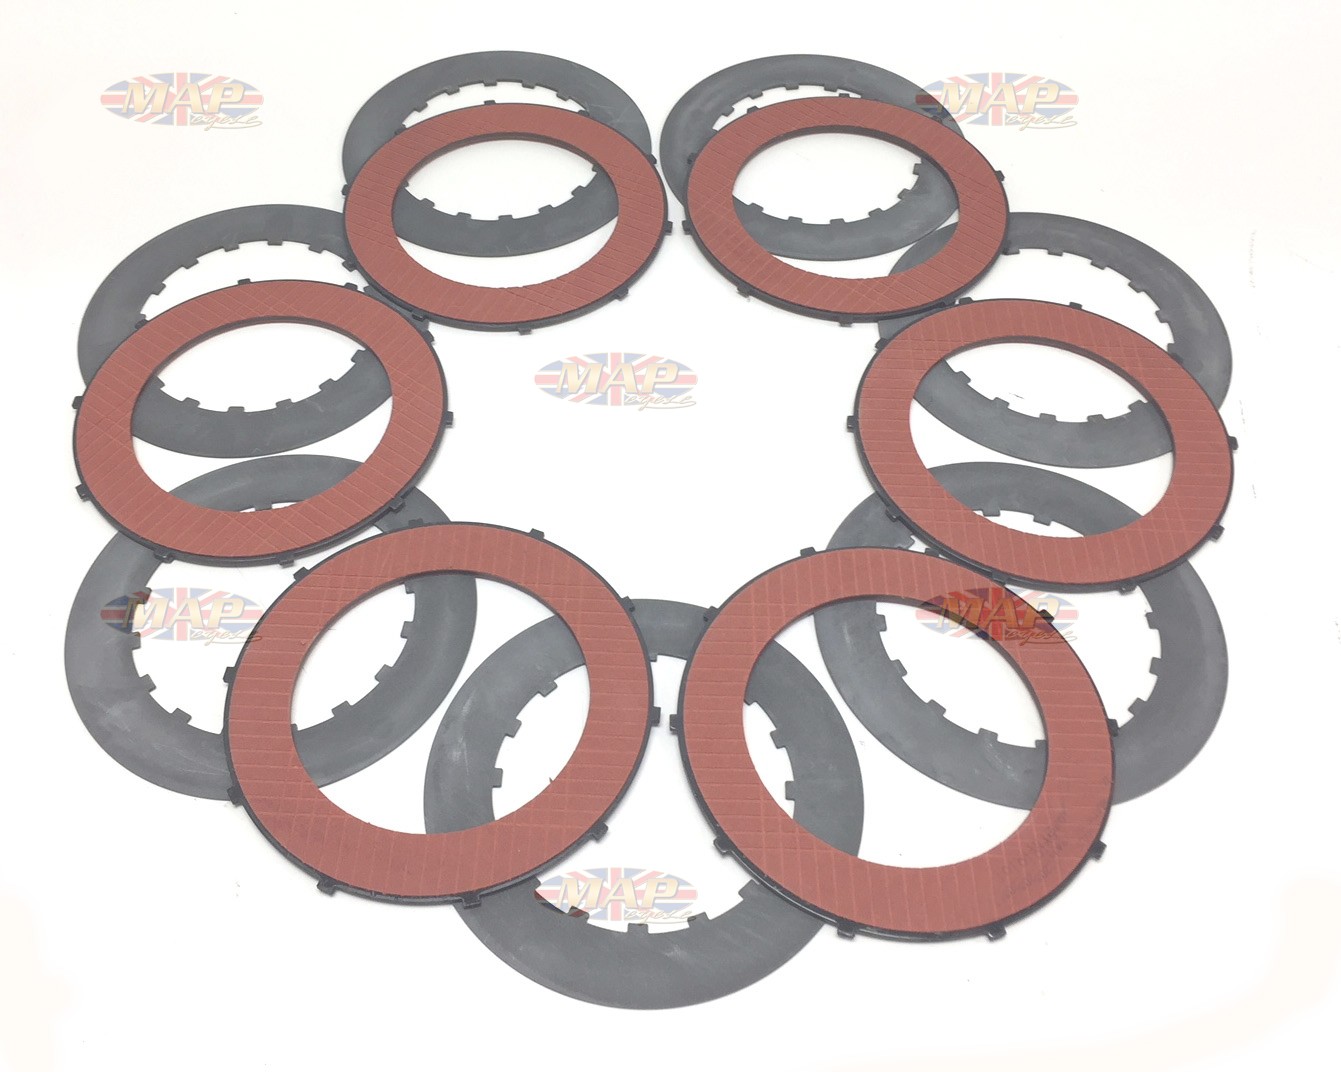 Triumph No-Drag Complete Clutch Plate Kit - Electric Start Models MAP2151